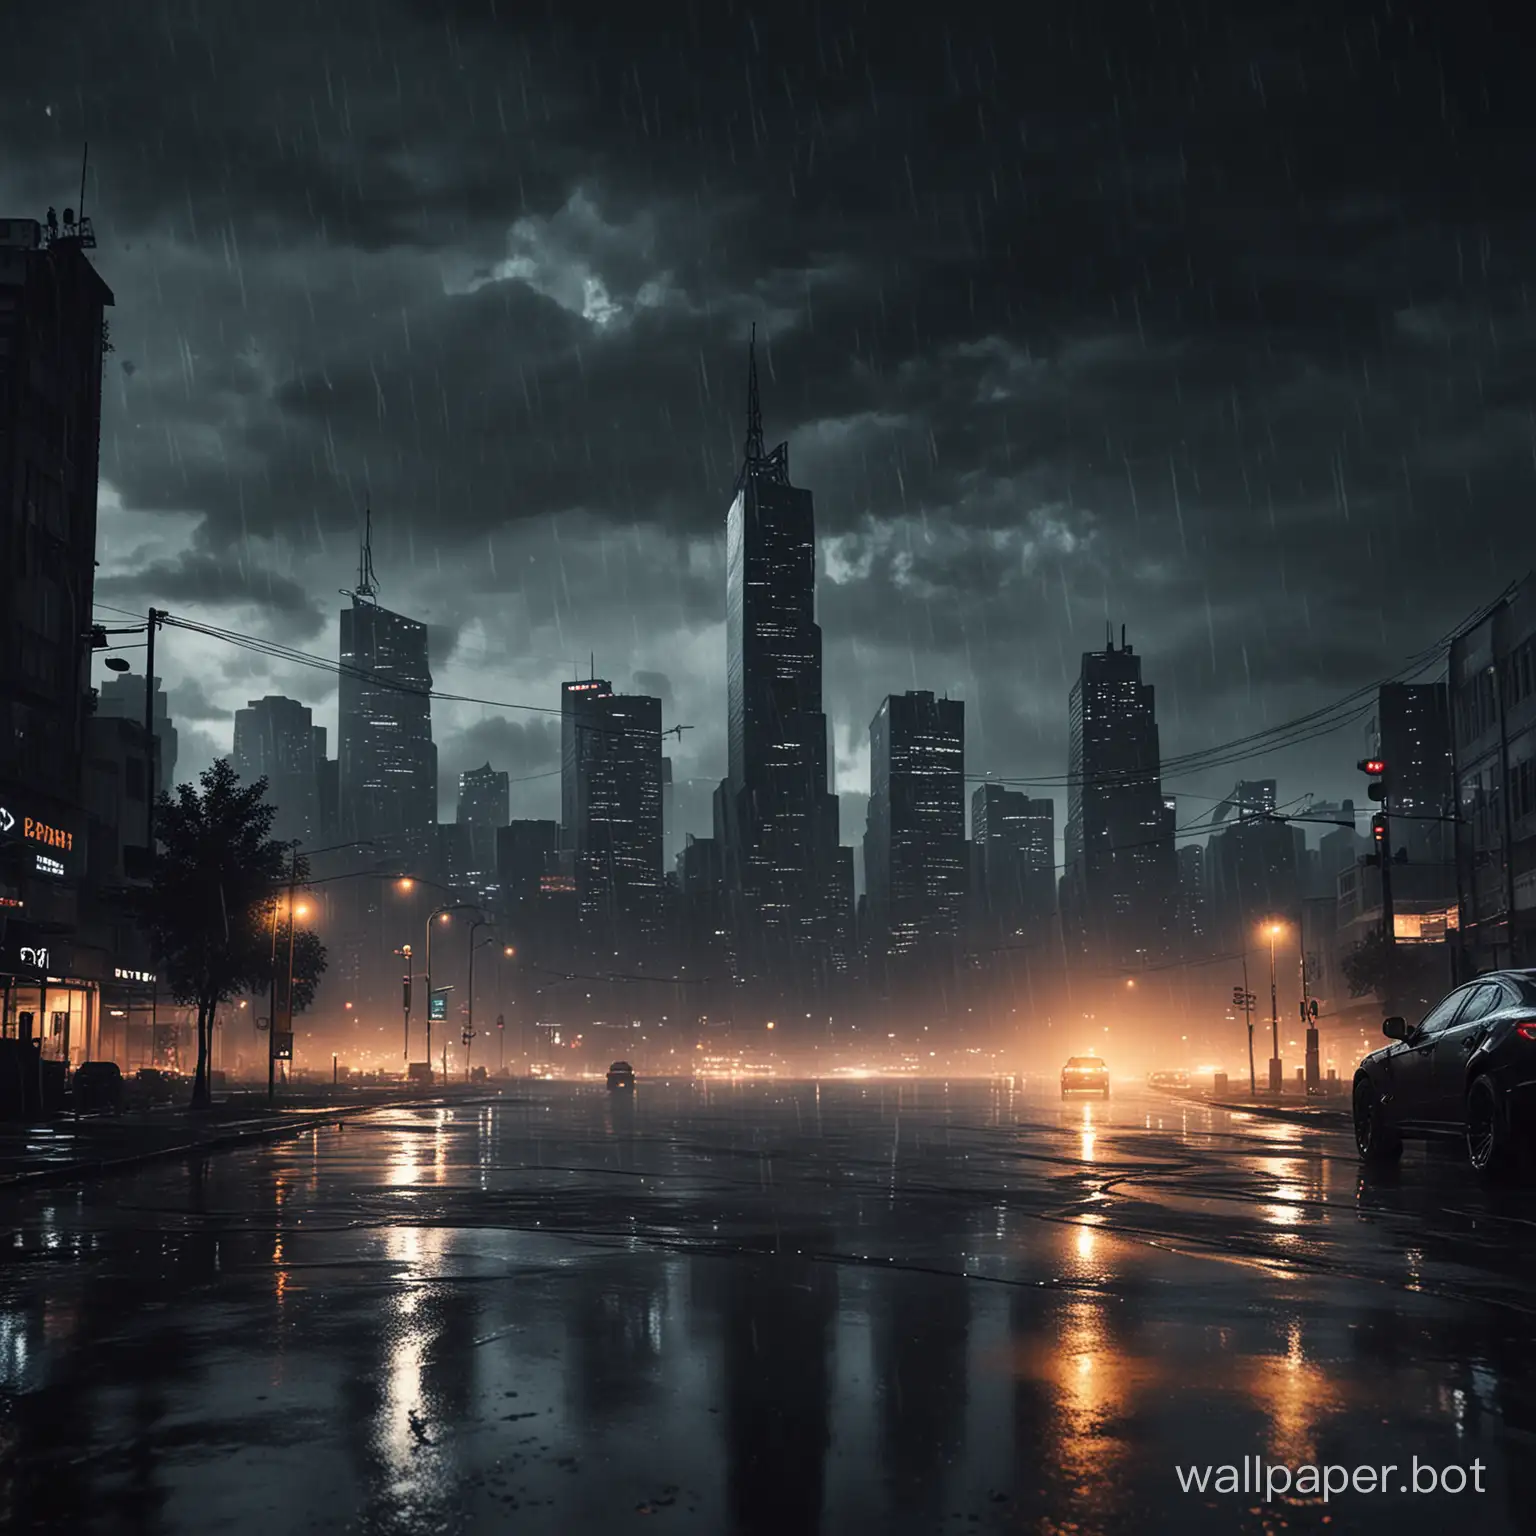 Minimalist-Battlefield-4-Themed-Dark-Wallpaper-with-Stormy-Raindrops-and-Cityscape